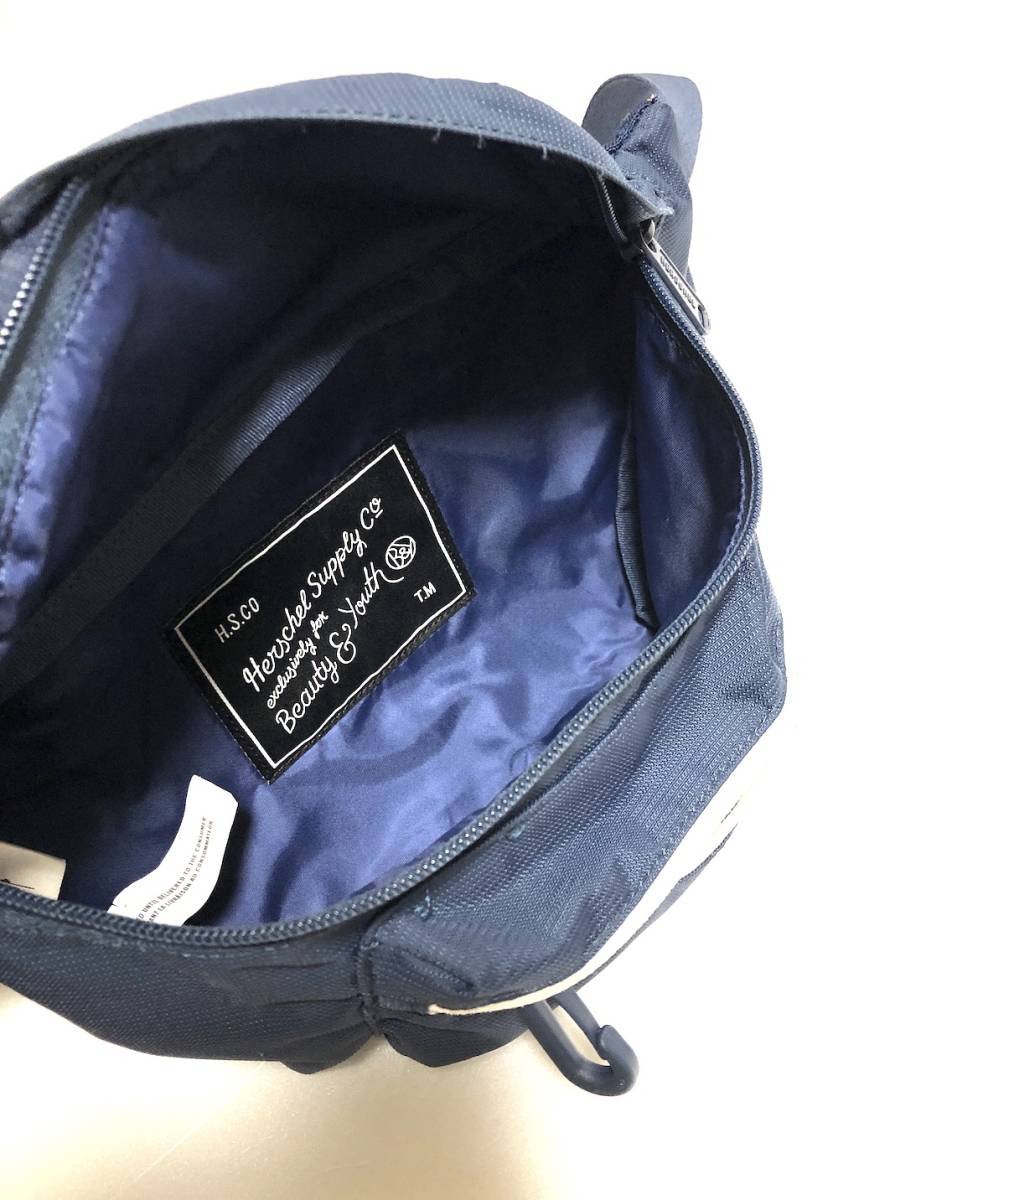 HERSCHEL×BEAUTY&YOUTH collaboration waist bag NVY navy body bag is - shell beauty and Youth 909148